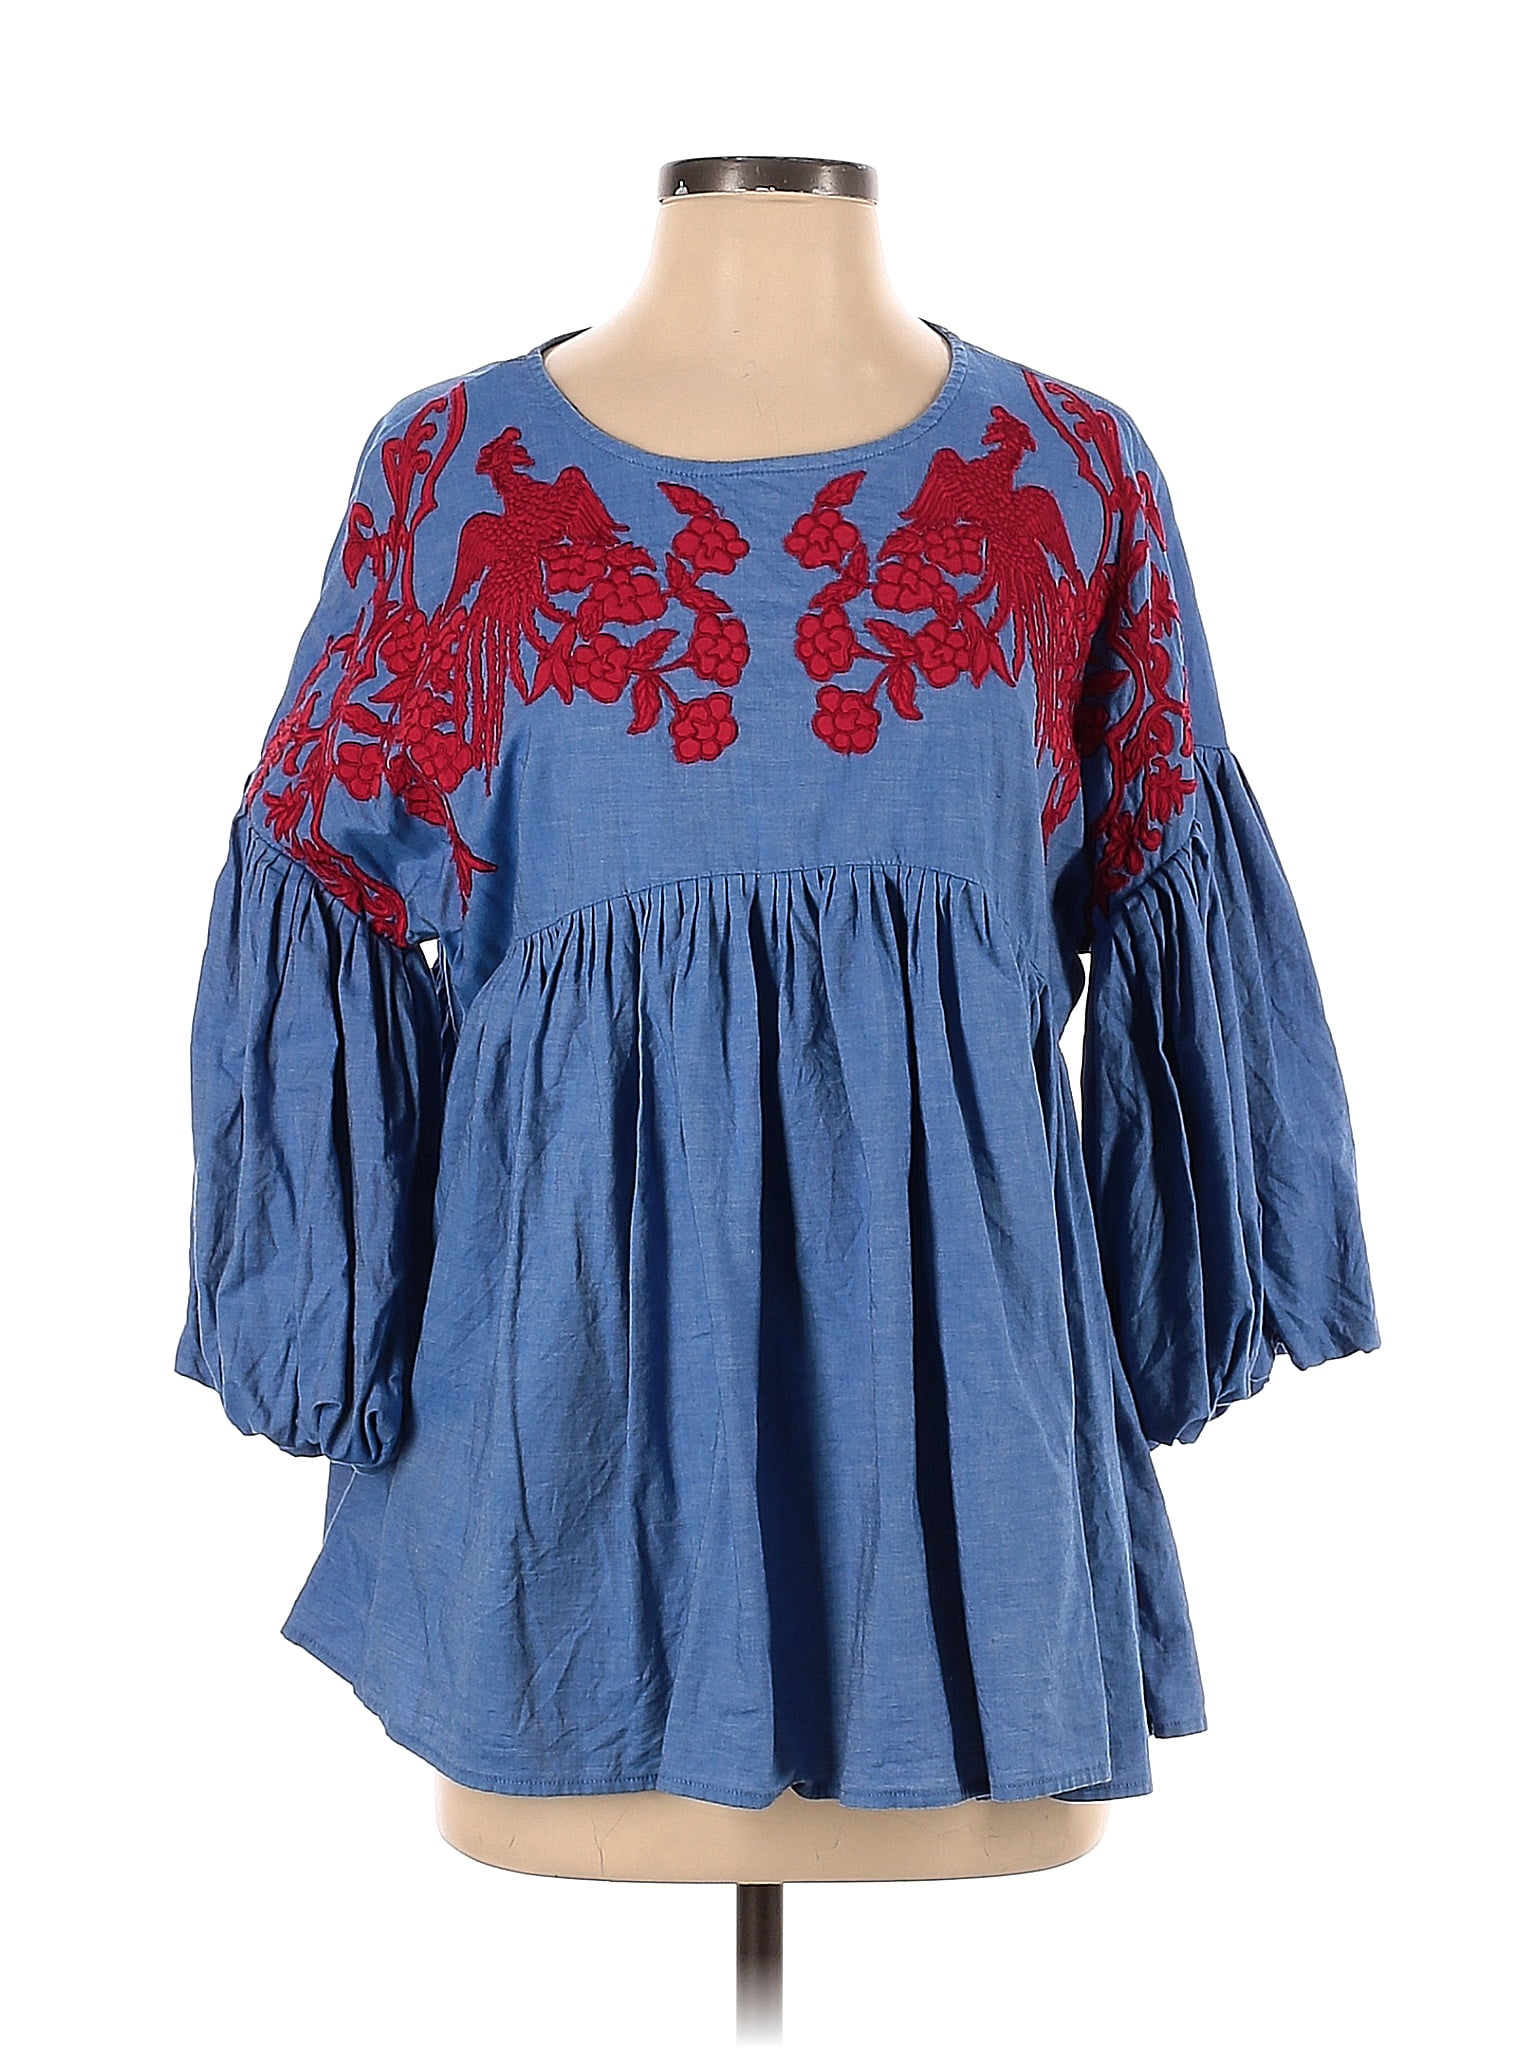 Hemant And Nandita 100% Cotton Floral Blue 3/4 Sleeve Blouse Size S ...